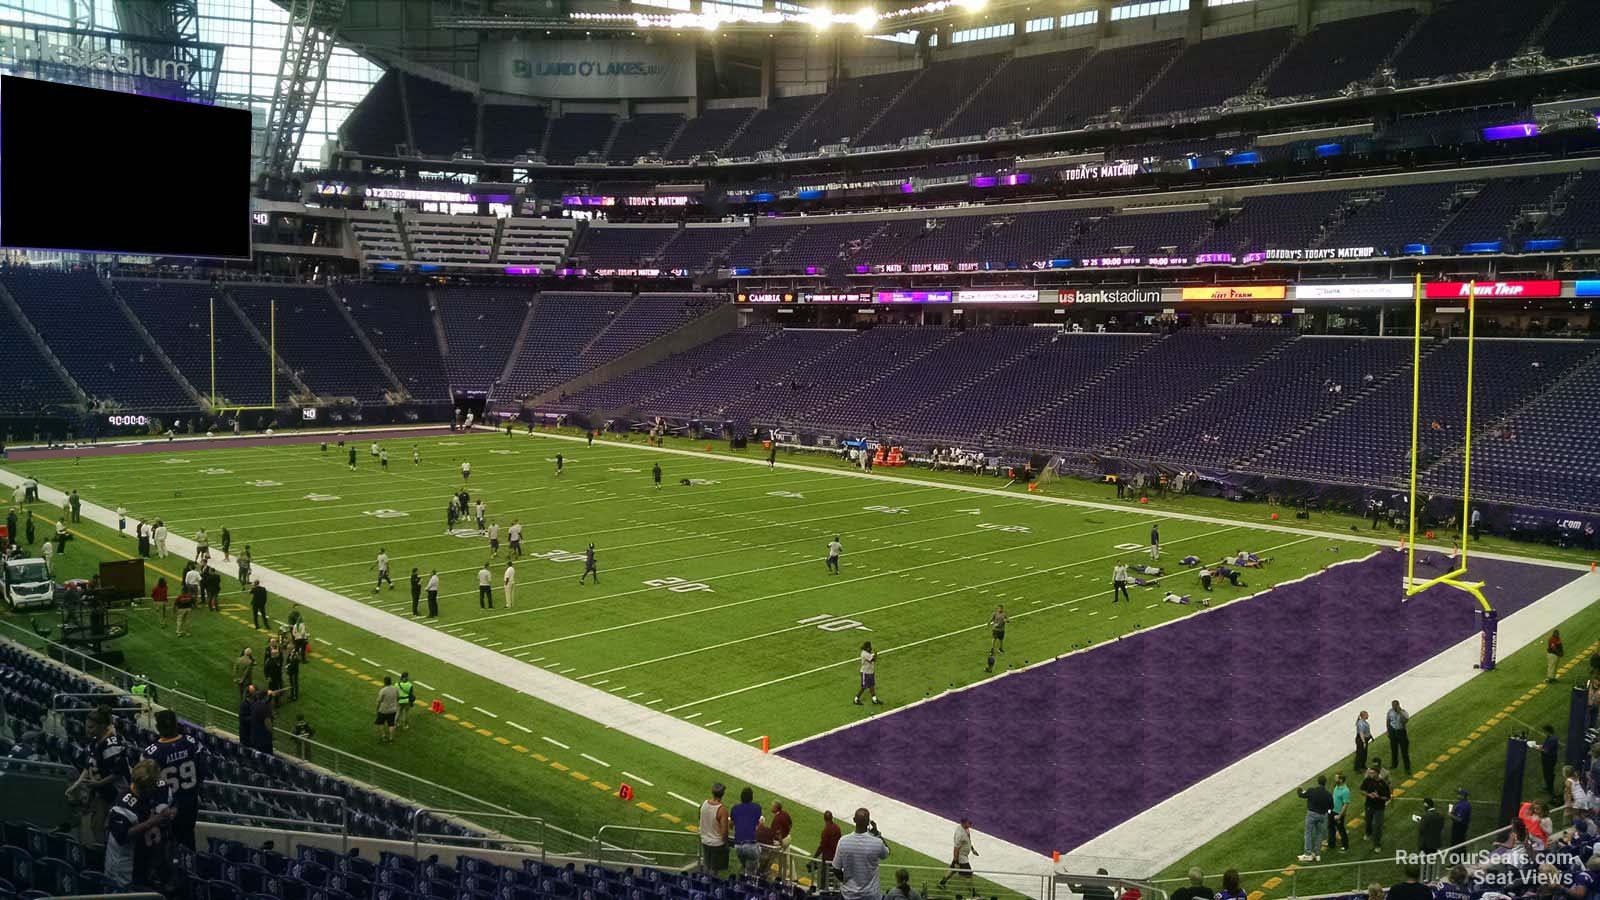 section 124, row 24 seat view  for football - u.s. bank stadium